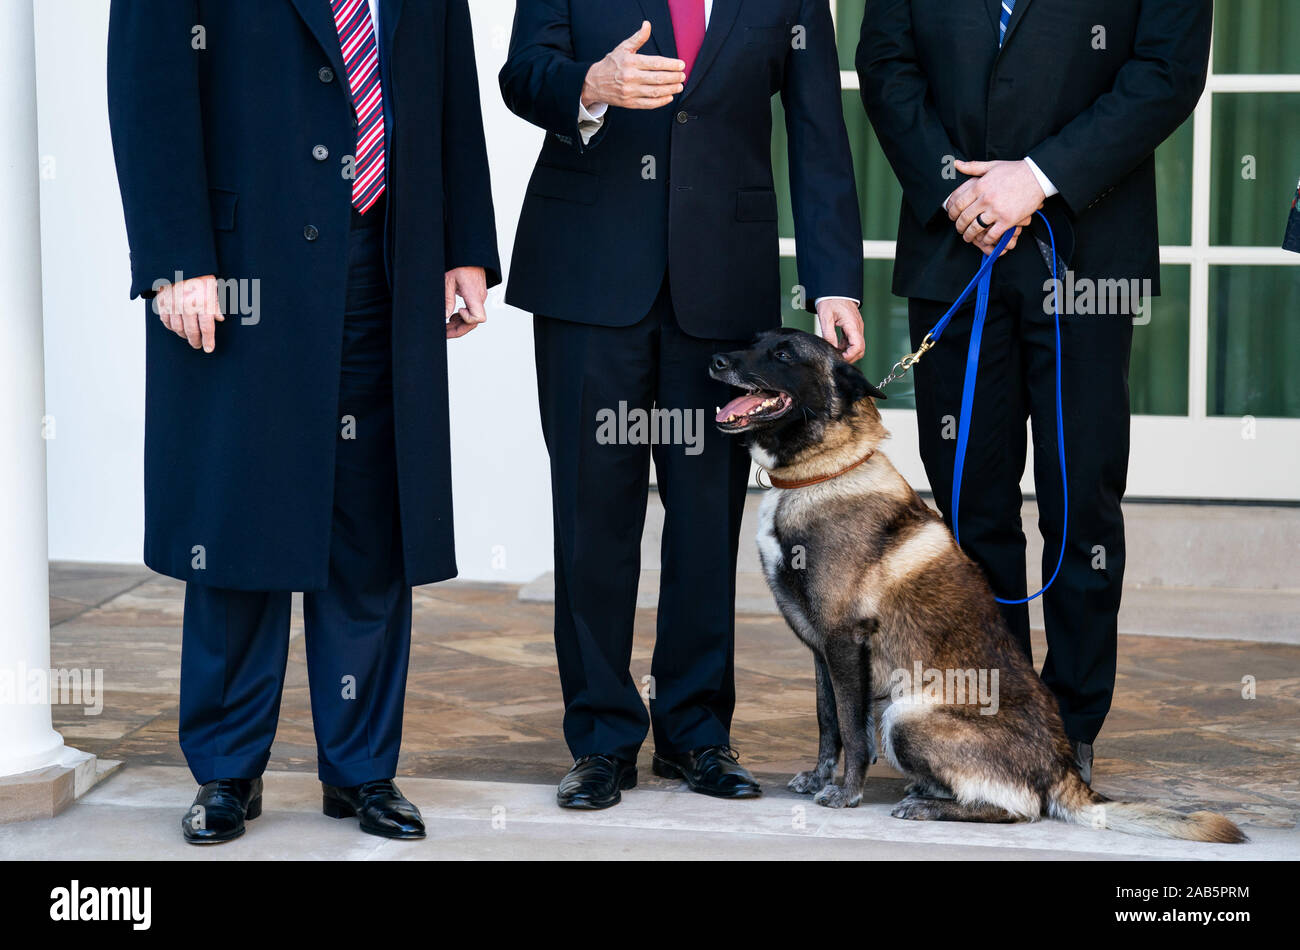 Washington, United States. 25th Nov, 2019. Vice President Mike Pence pets Conan the military working dog as he speaks alongside President Trump, at the White House in Washington, DC on November 25, 2019. The dog Conan assisted in the Baghdadi raid and was awarded a medal by President Trump. Photo by Kevin Dietsch/UPI Credit: UPI/Alamy Live News Stock Photo